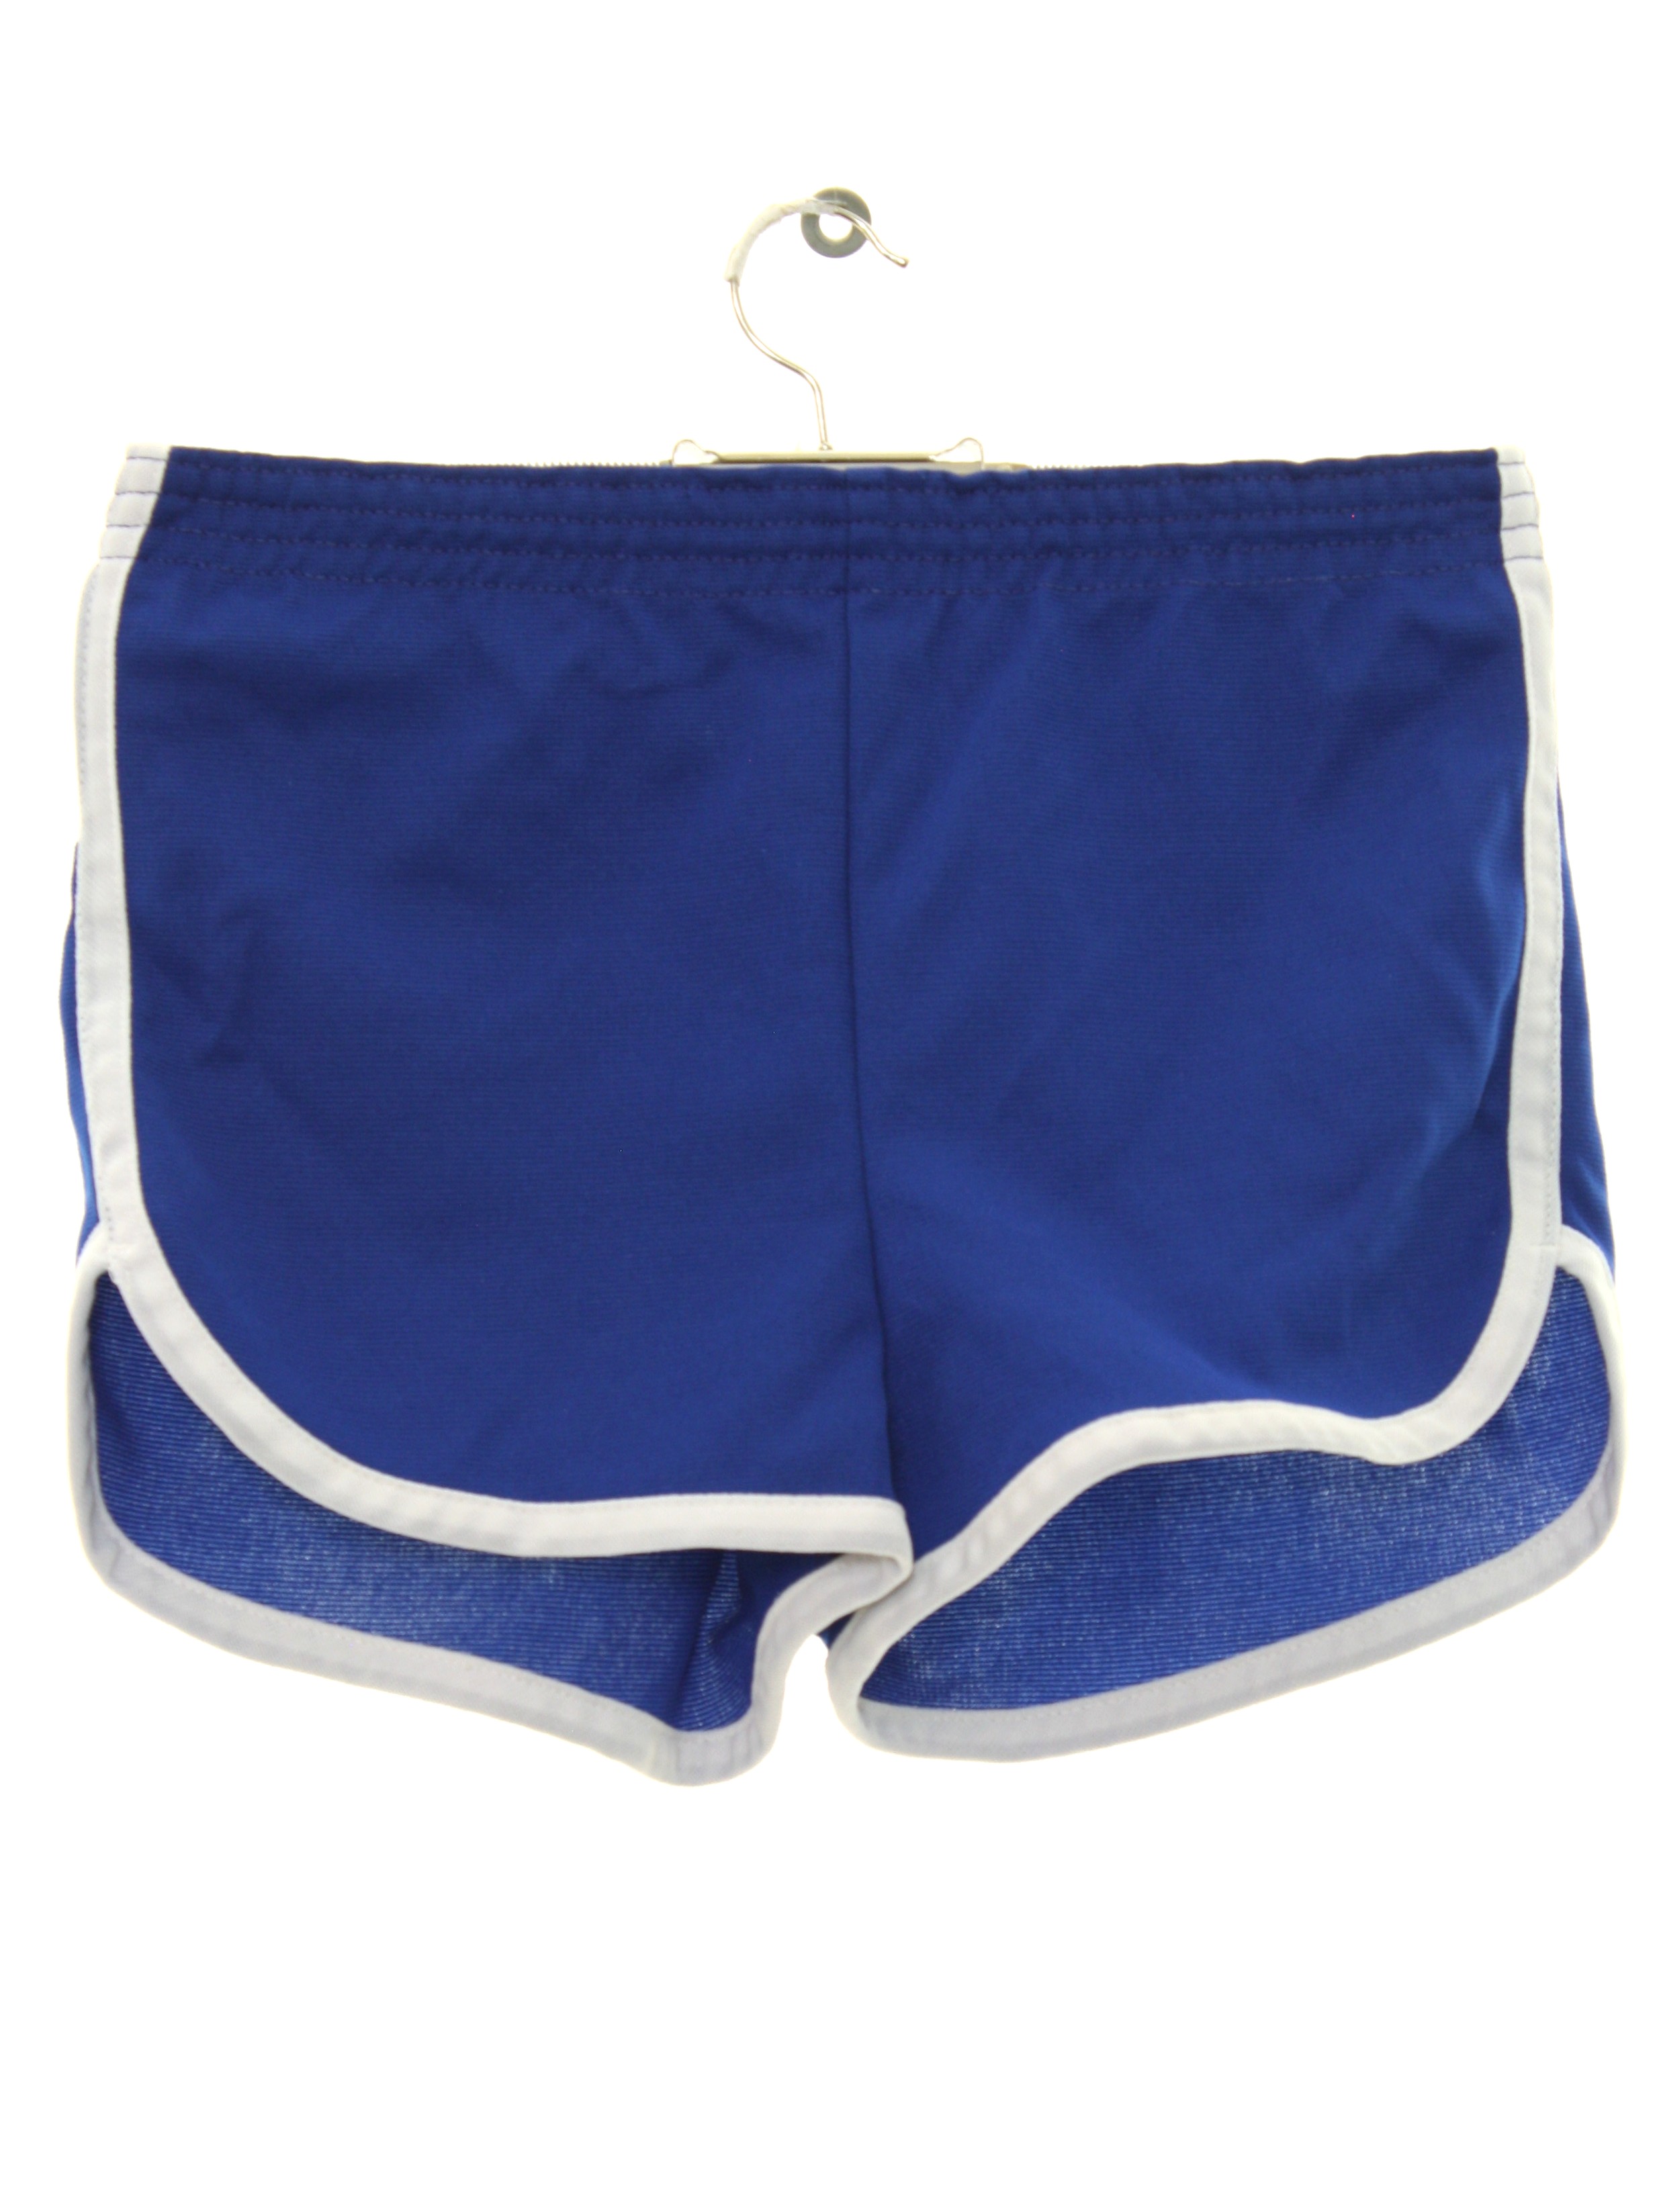 1980's Shorts (Kmart): 80s -Kmart- Unisex royal blue background polyester  totally 80s sport shorts with elastic waistband, no lining, no pockets and  white trim along the side seams and leg openings.